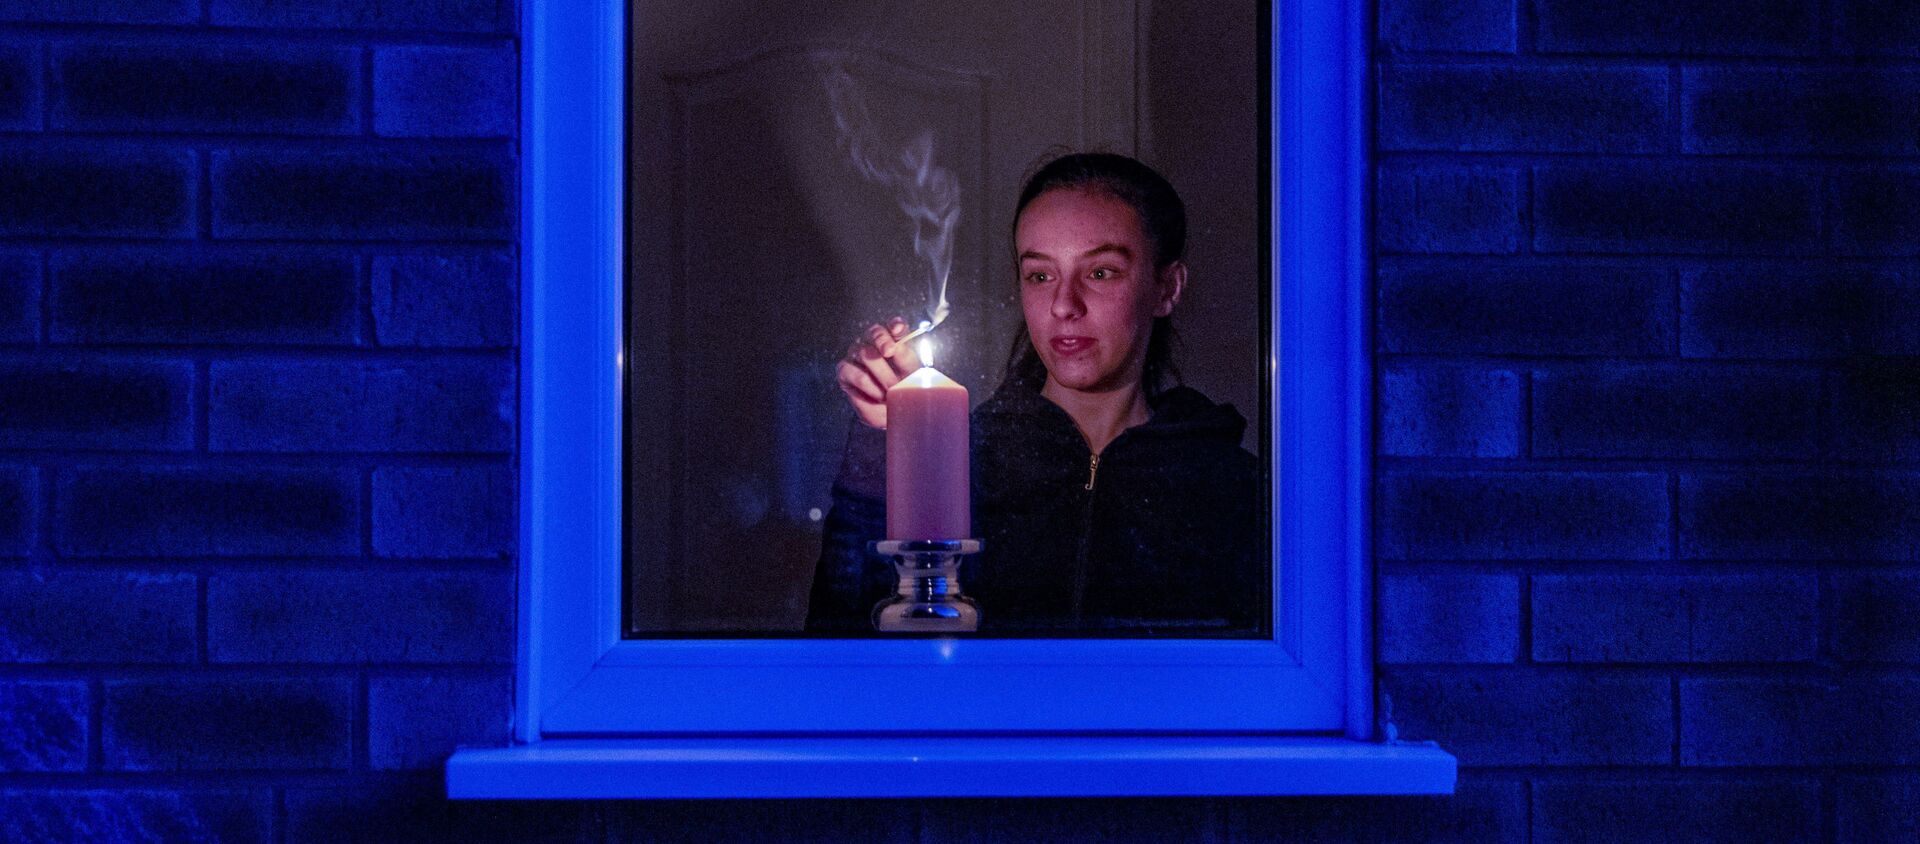 Woman lights a candle in the window of a home in Liverpool, England, after the Queen stressed the importance of maintaining the coronavirus lockdown during the Easter Bank Holiday weekend as she delivered what is believed to be her first Easter address, Saturday, April 11, 2020 - Sputnik International, 1920, 15.06.2020